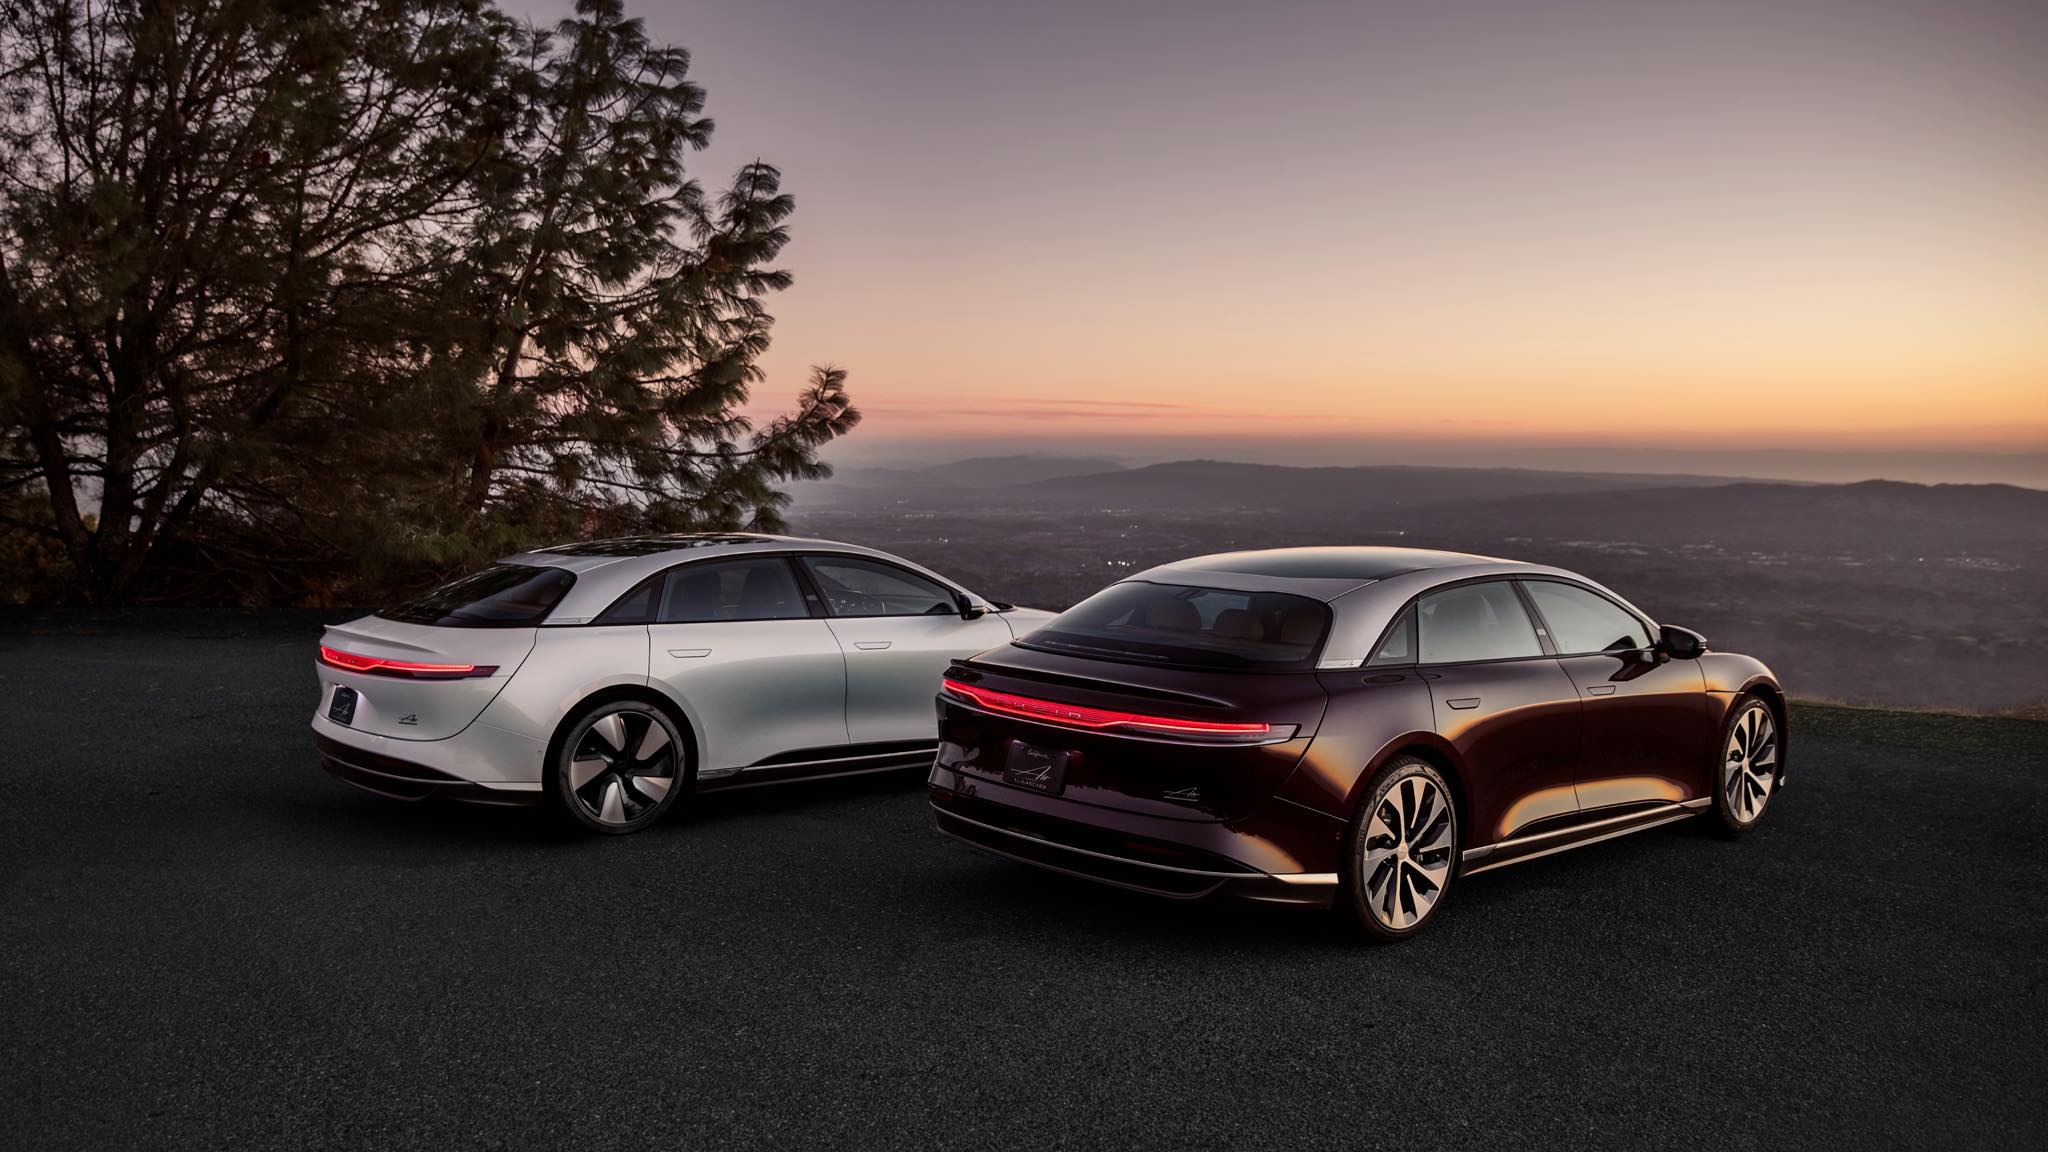 How To Be First To Know When Lucid Air EVs Are Available In Your Country